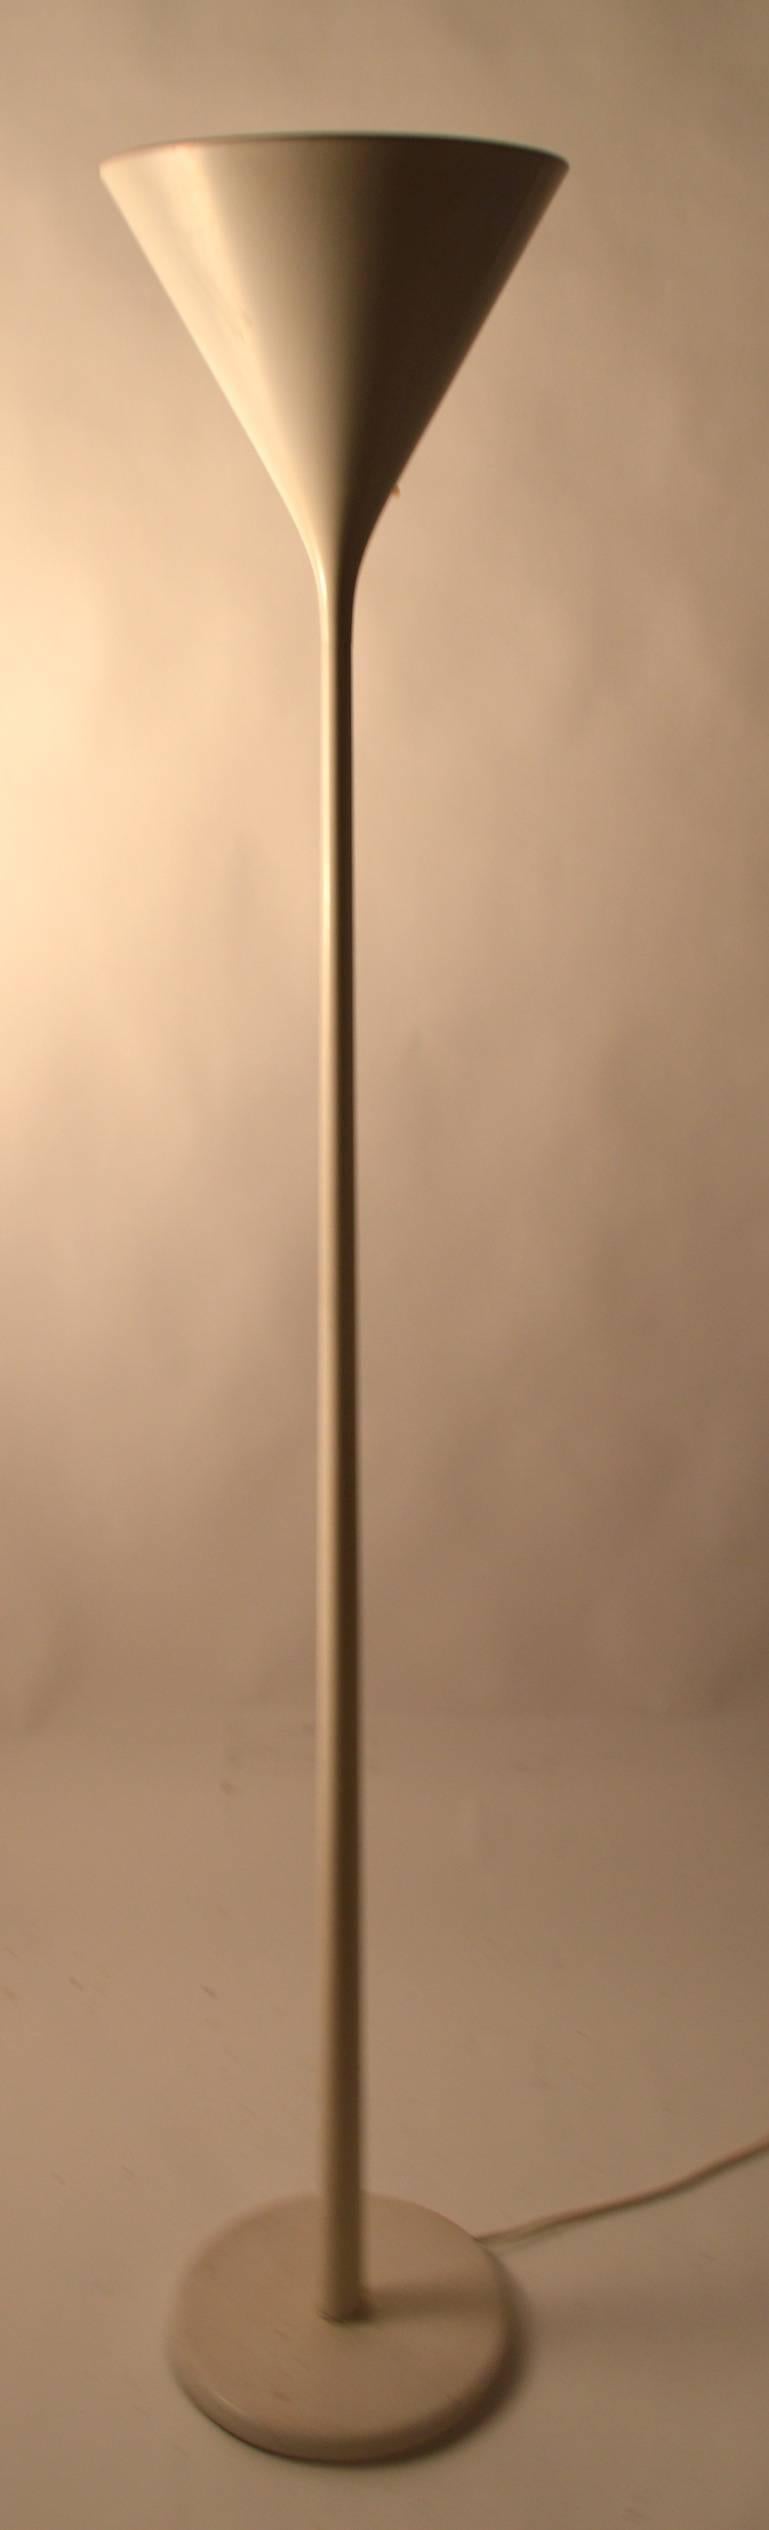 Modernist white enamel torchiere in the style of Max Bill.  This floor lamp takes the larger 